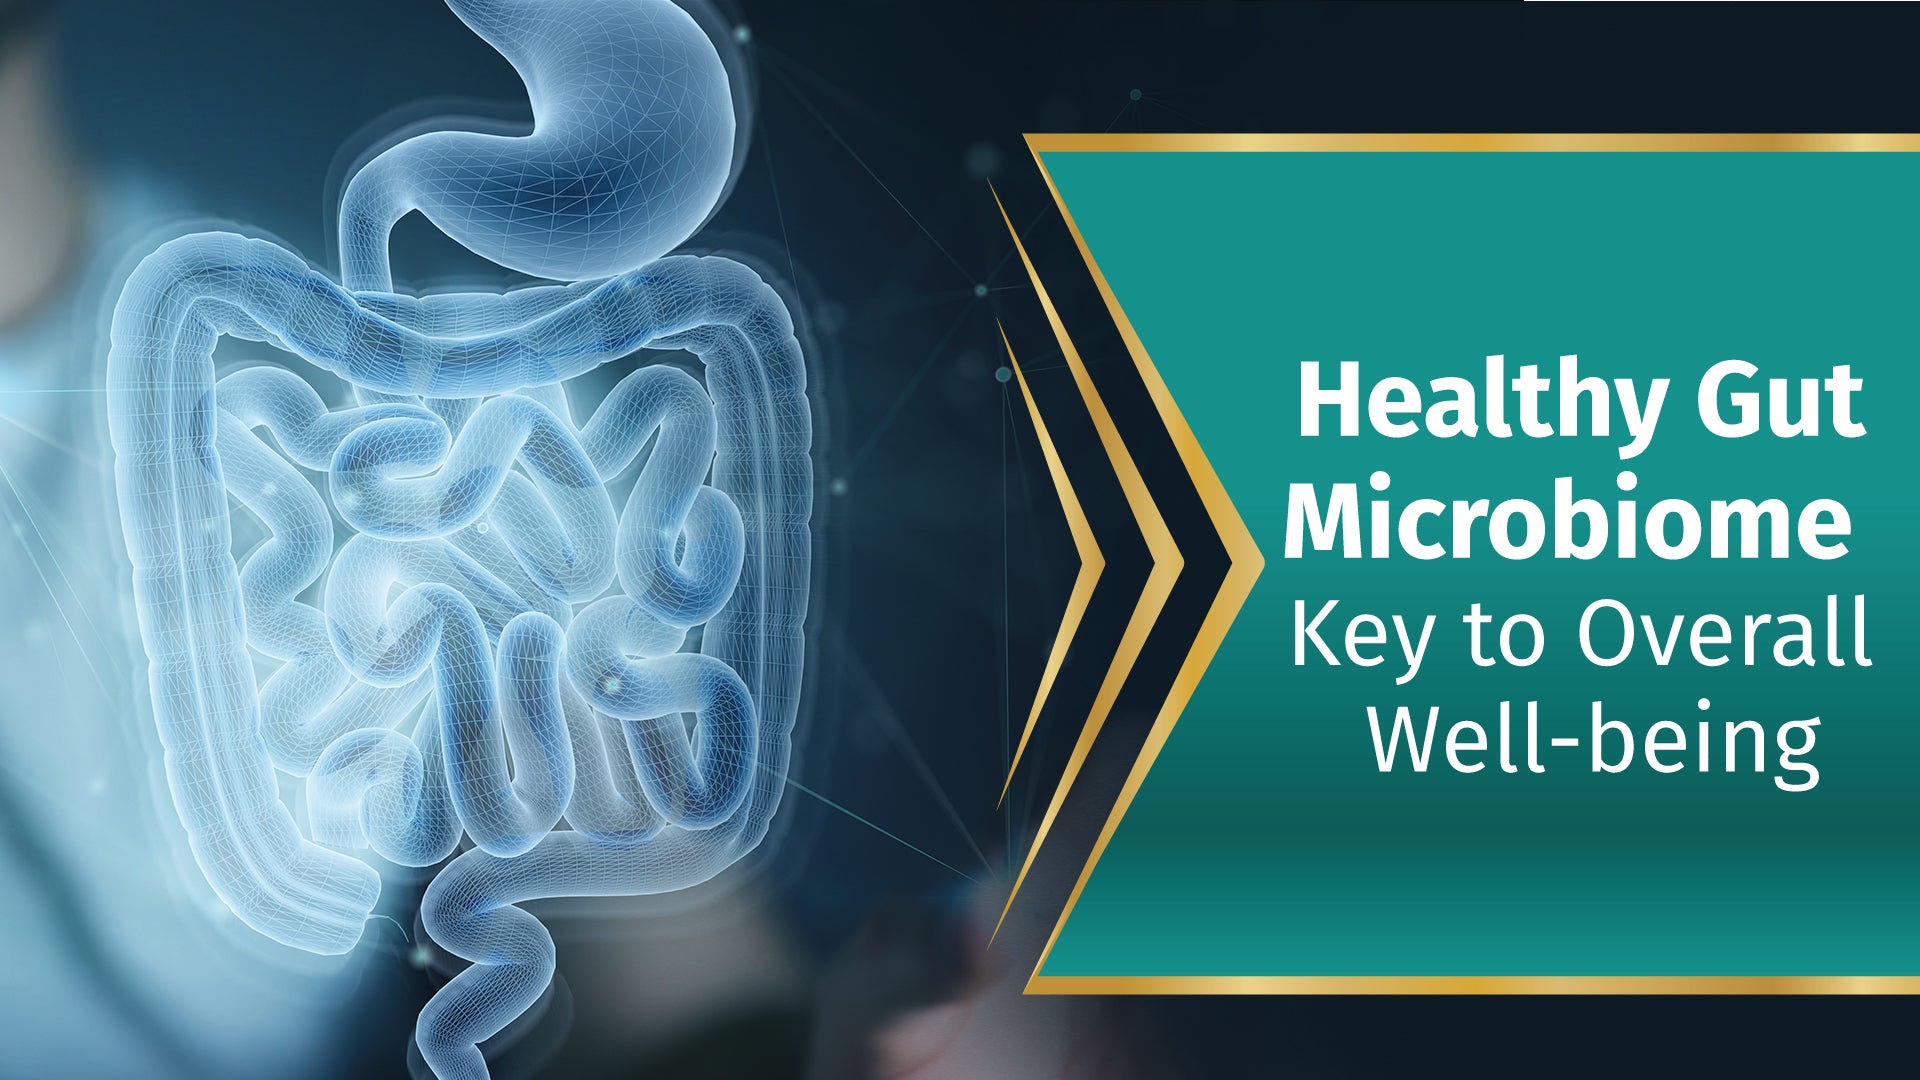 Healthy Gut Microbiome – Key to Overall Well-being